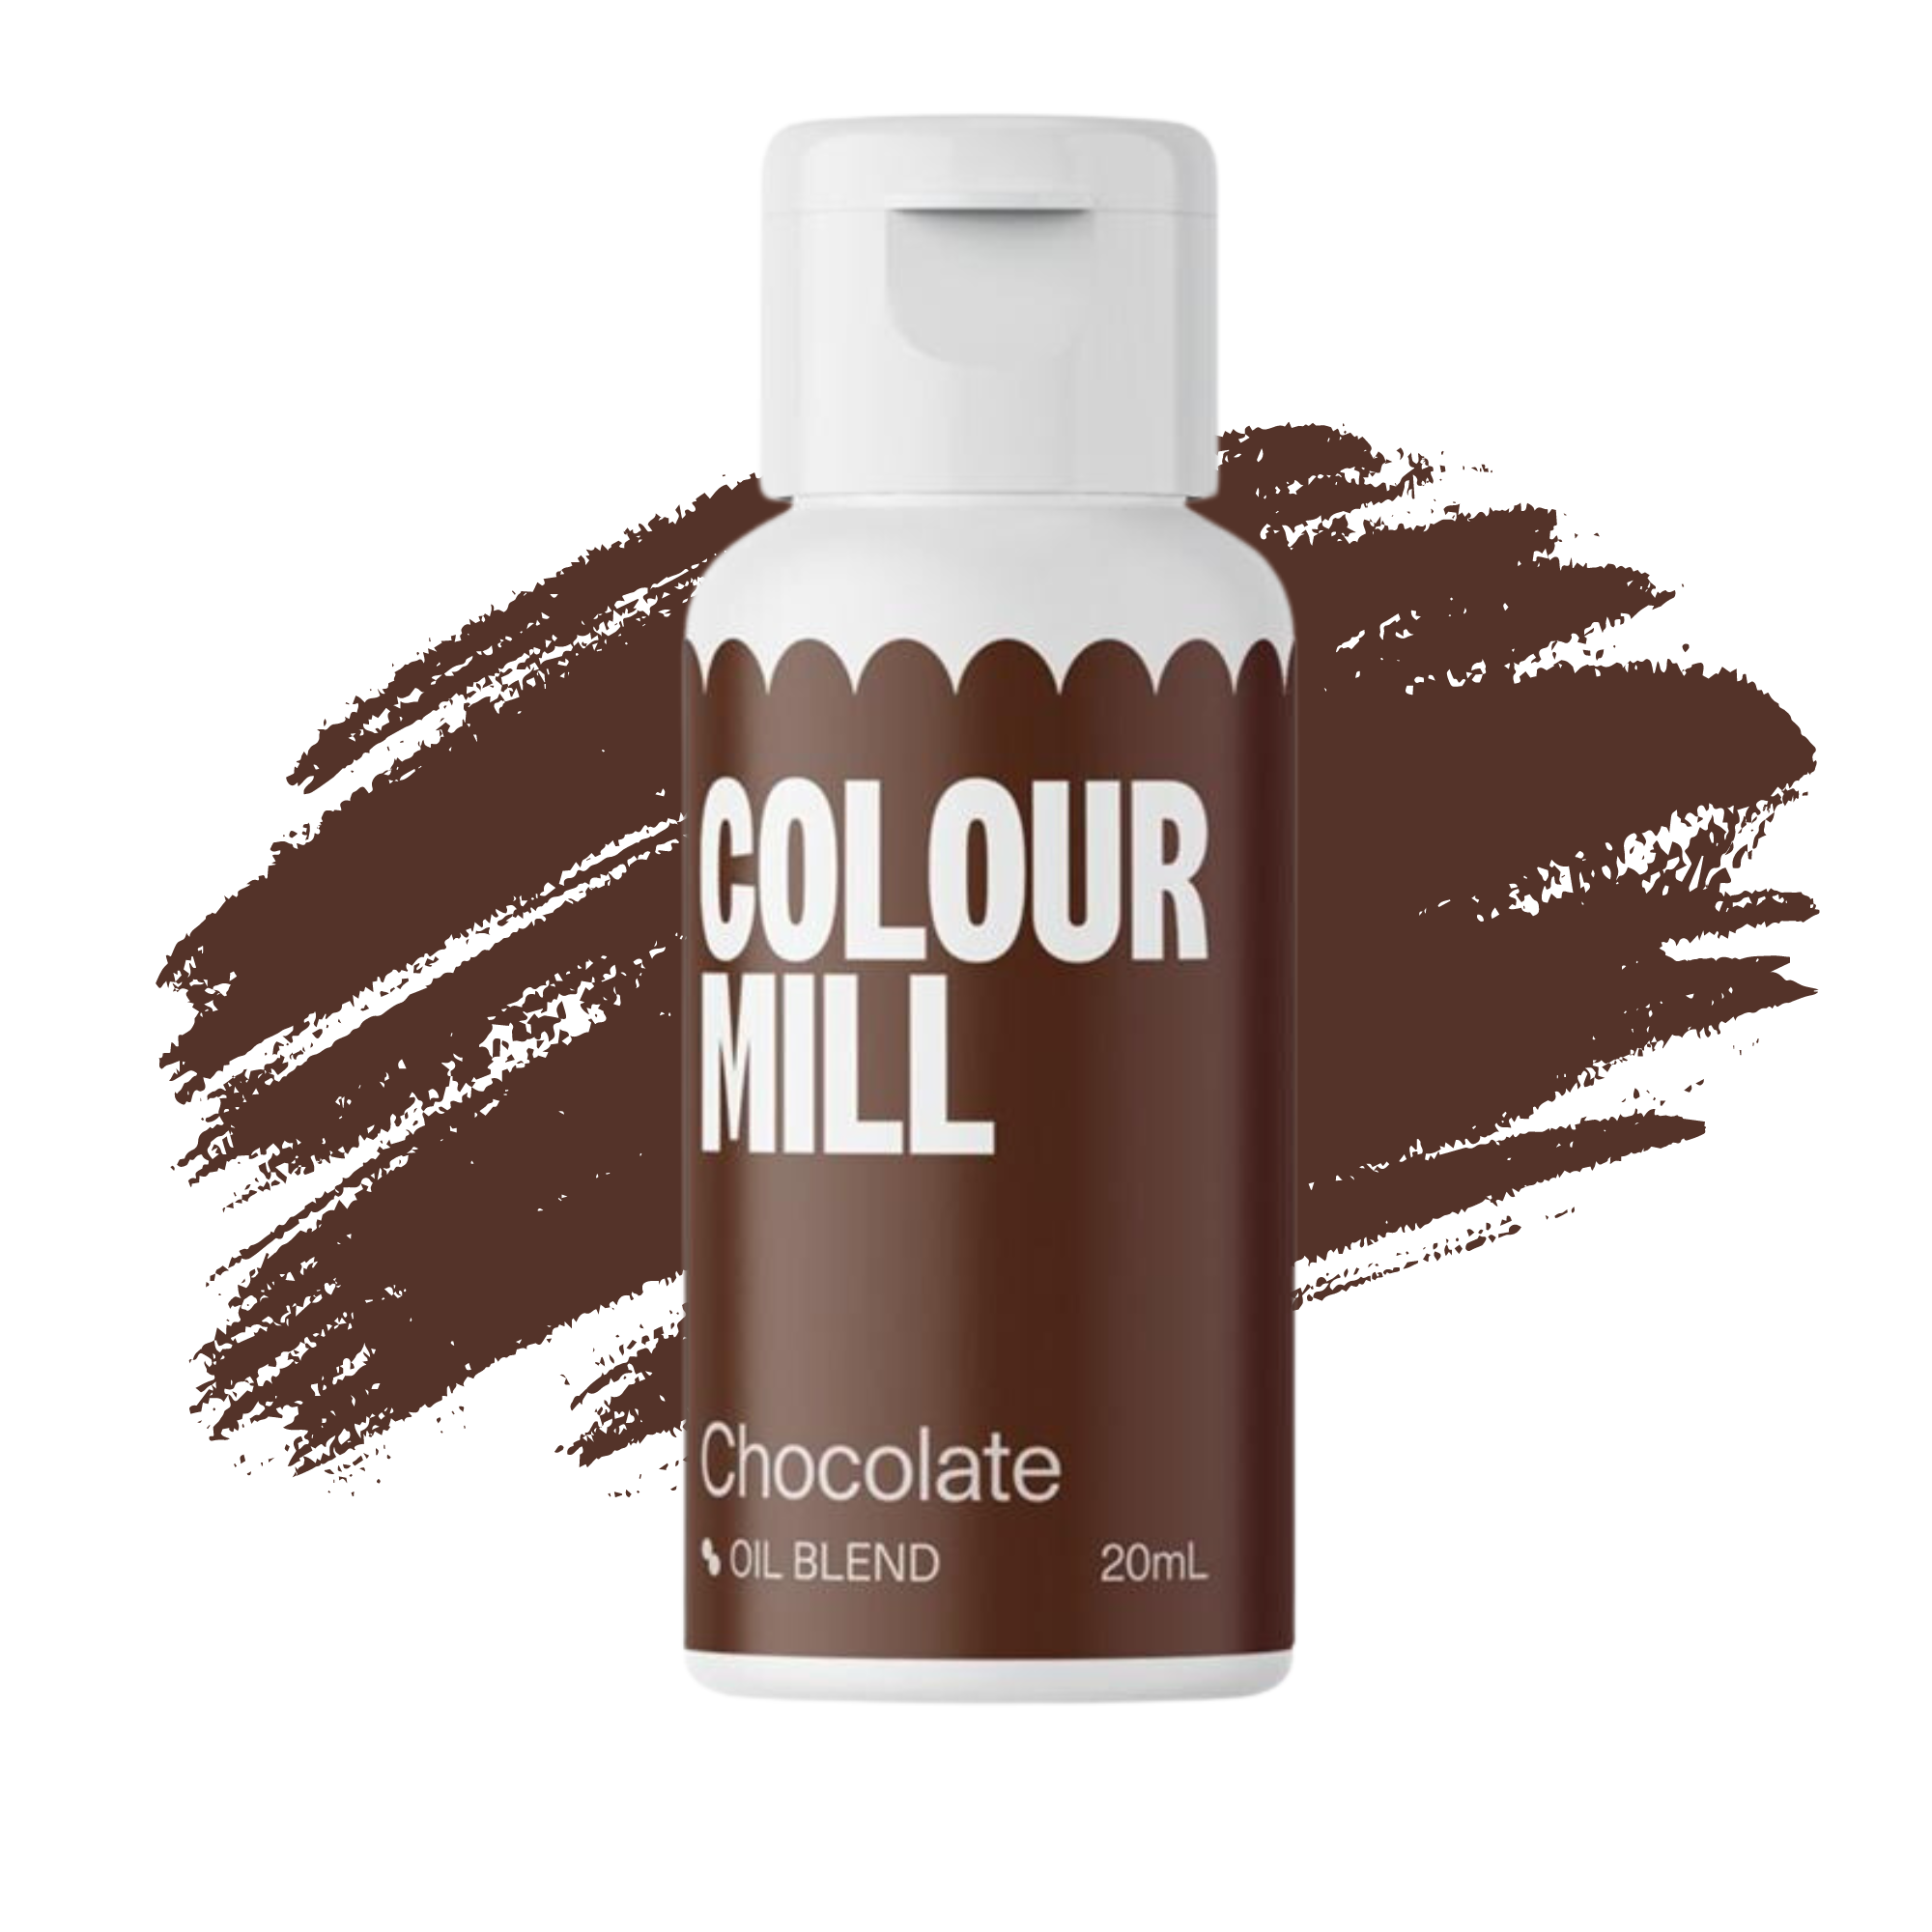 Colour Mill Brown Food Colouring, Colour Mill Chocolate Food Colouring, Colour Mill Chocolate Brown Food Colouring